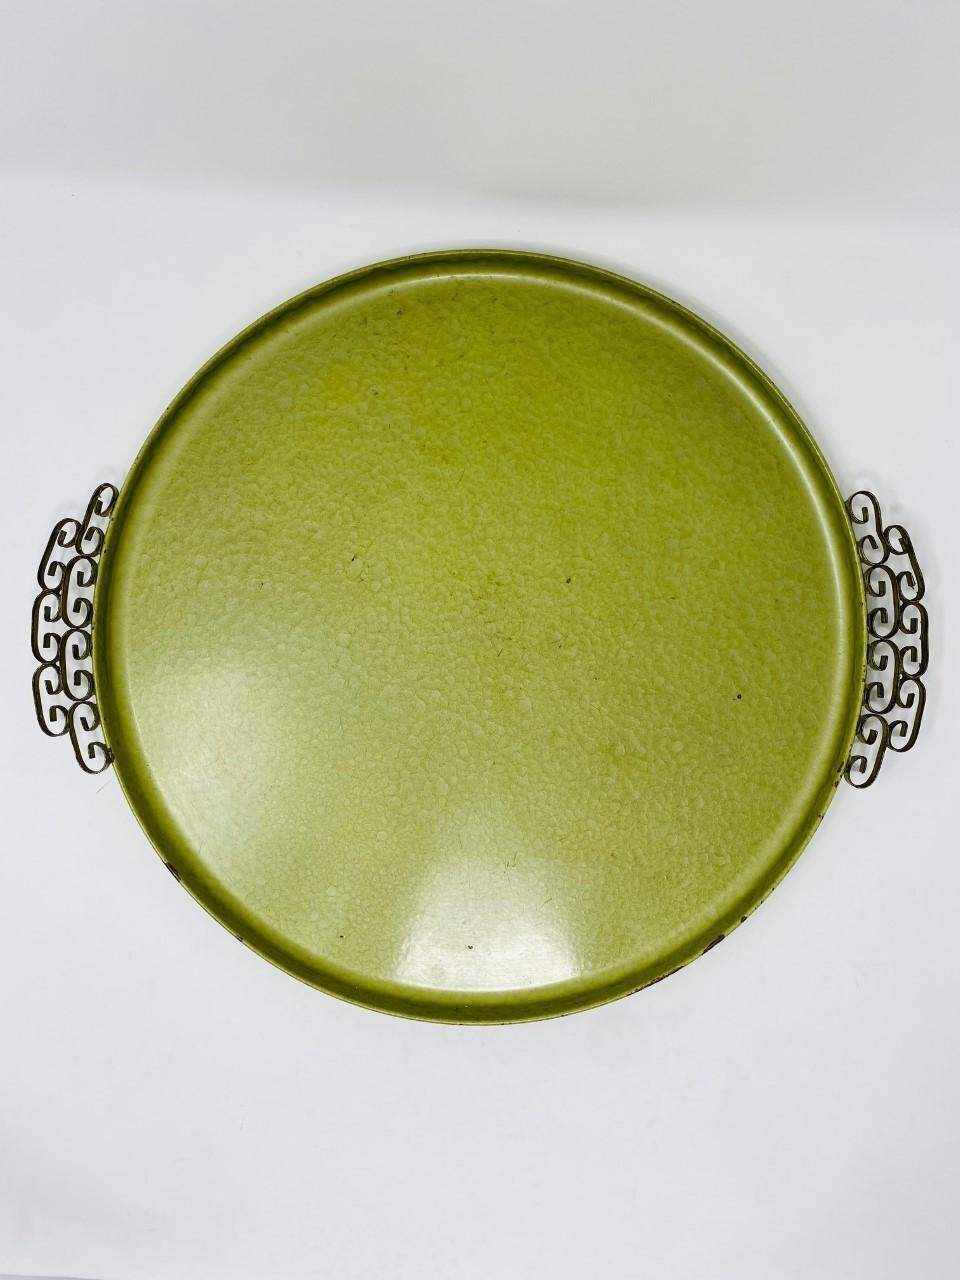 Vintage Mid Century Kyes Moire' Glaze Brass and Enamel Green Tray 1960s en vente 3